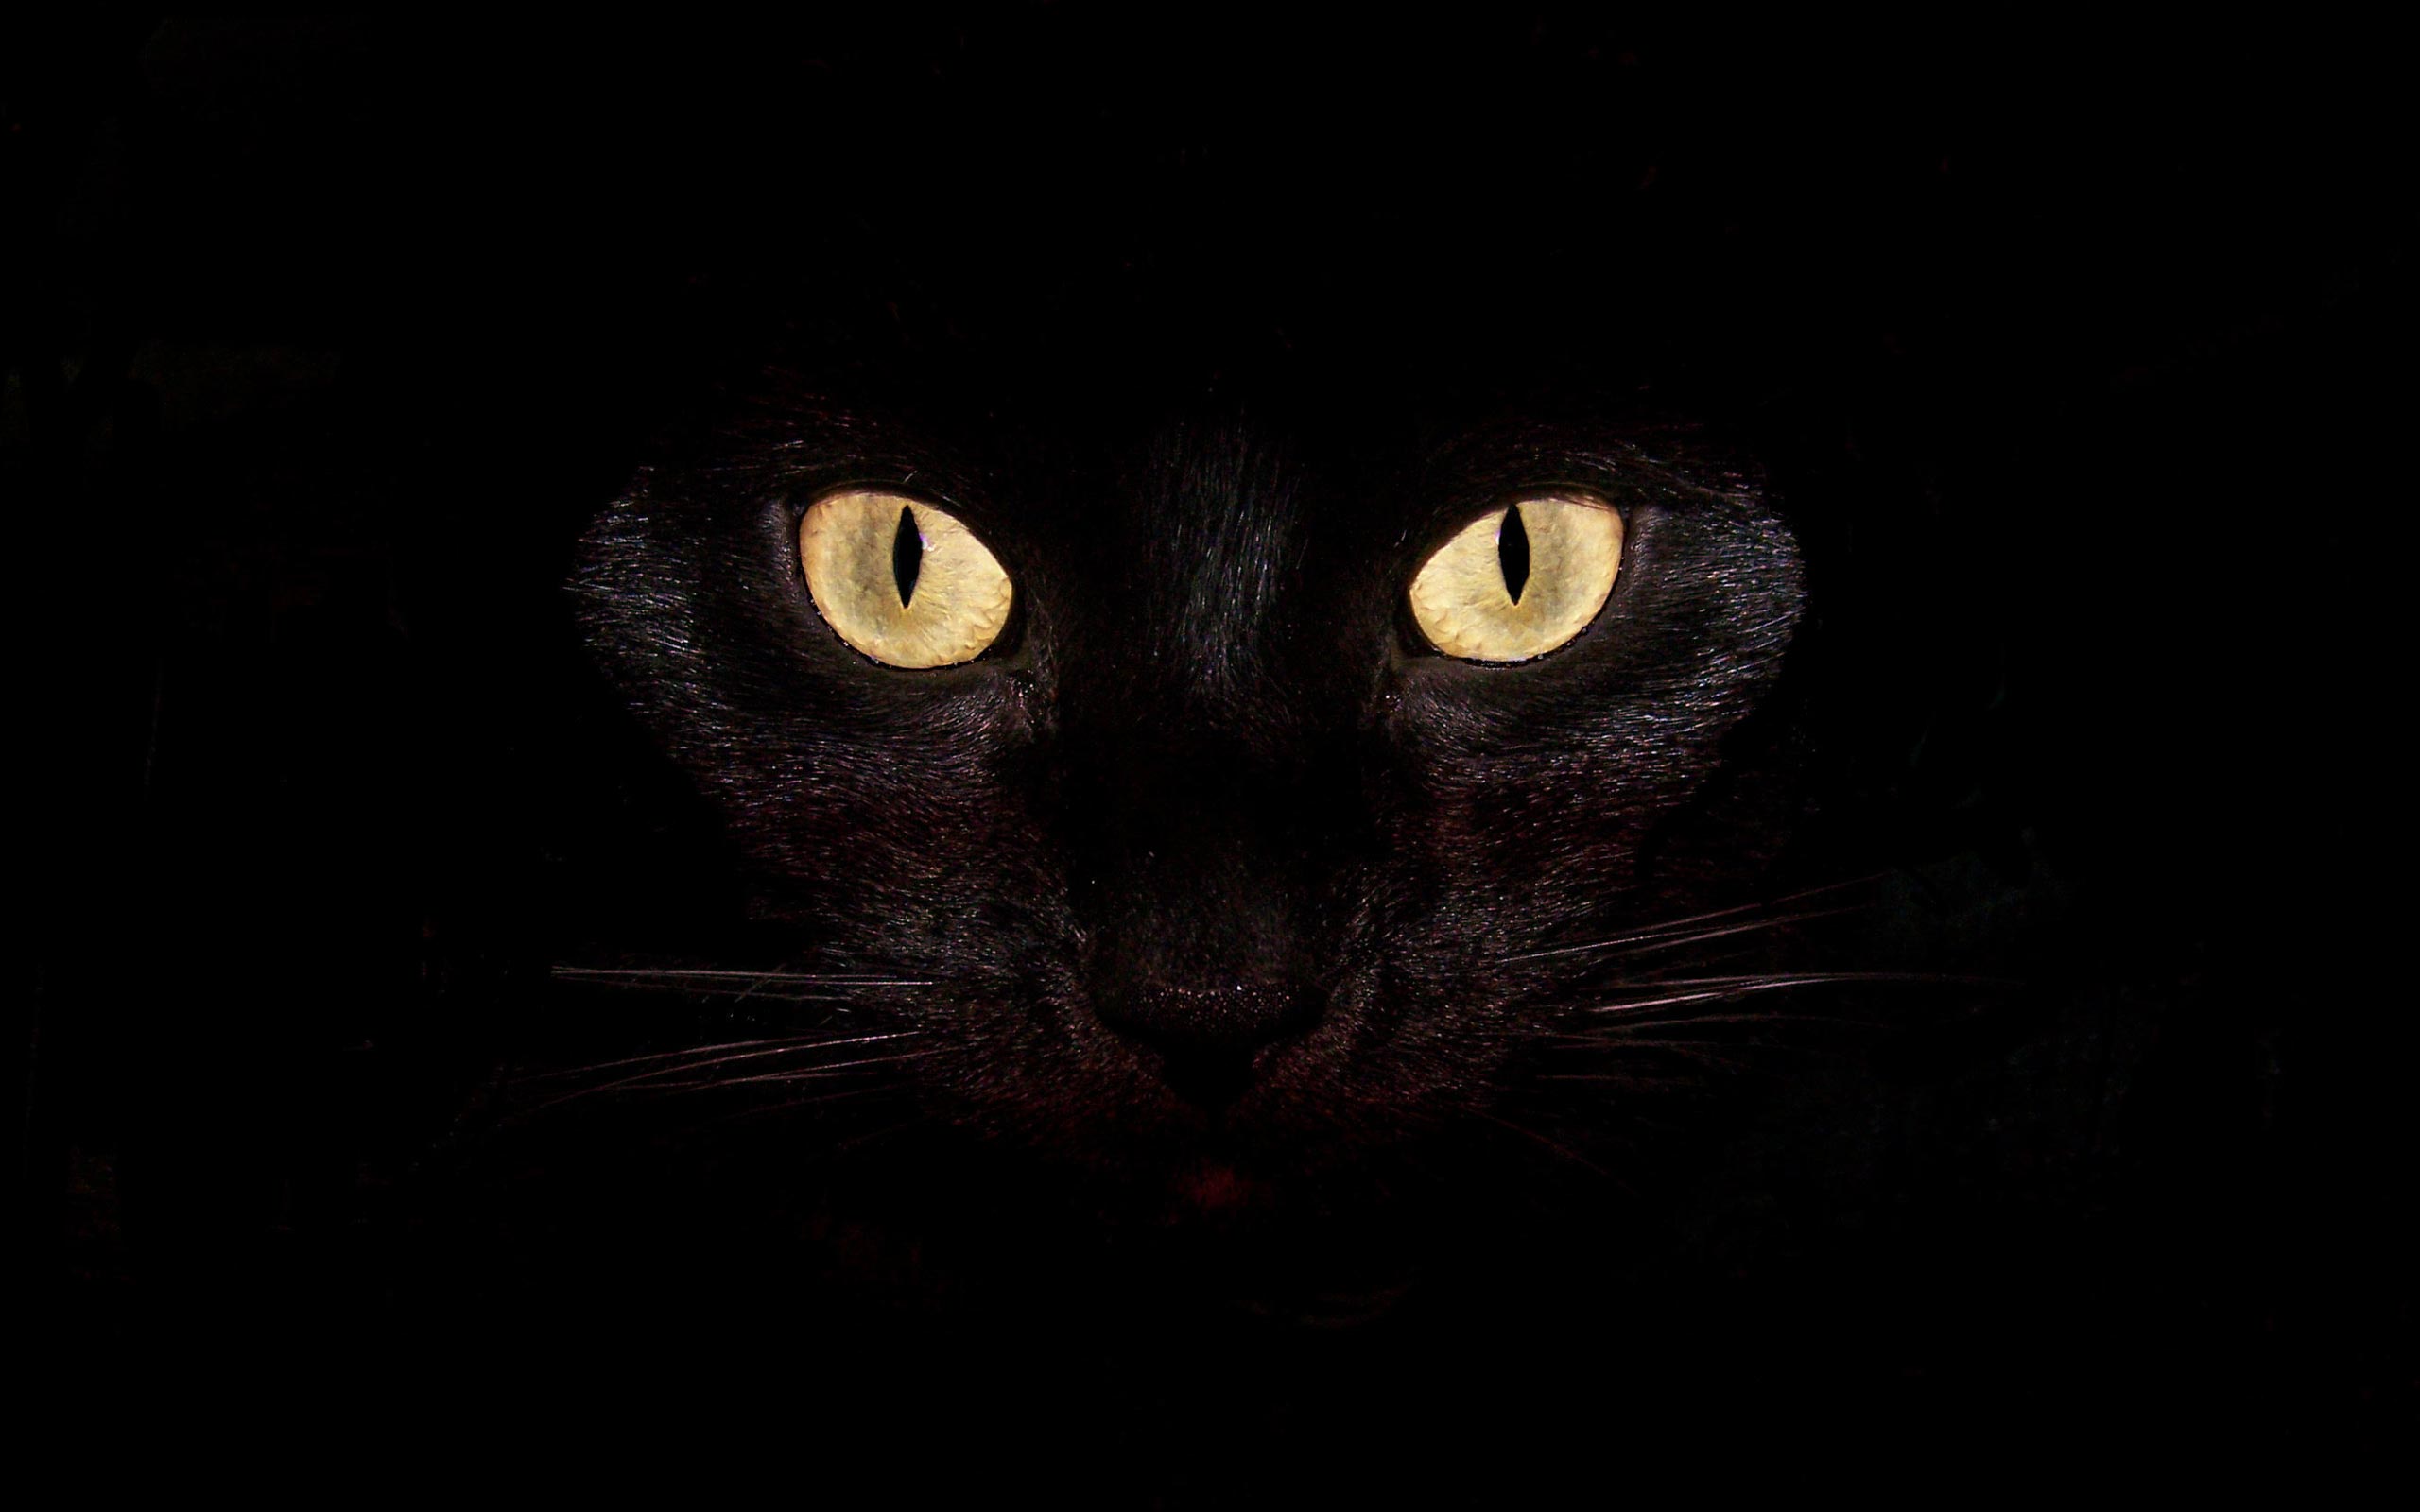 Abstract Black cat backgrounds Wallpaper High Quality 2560x1600